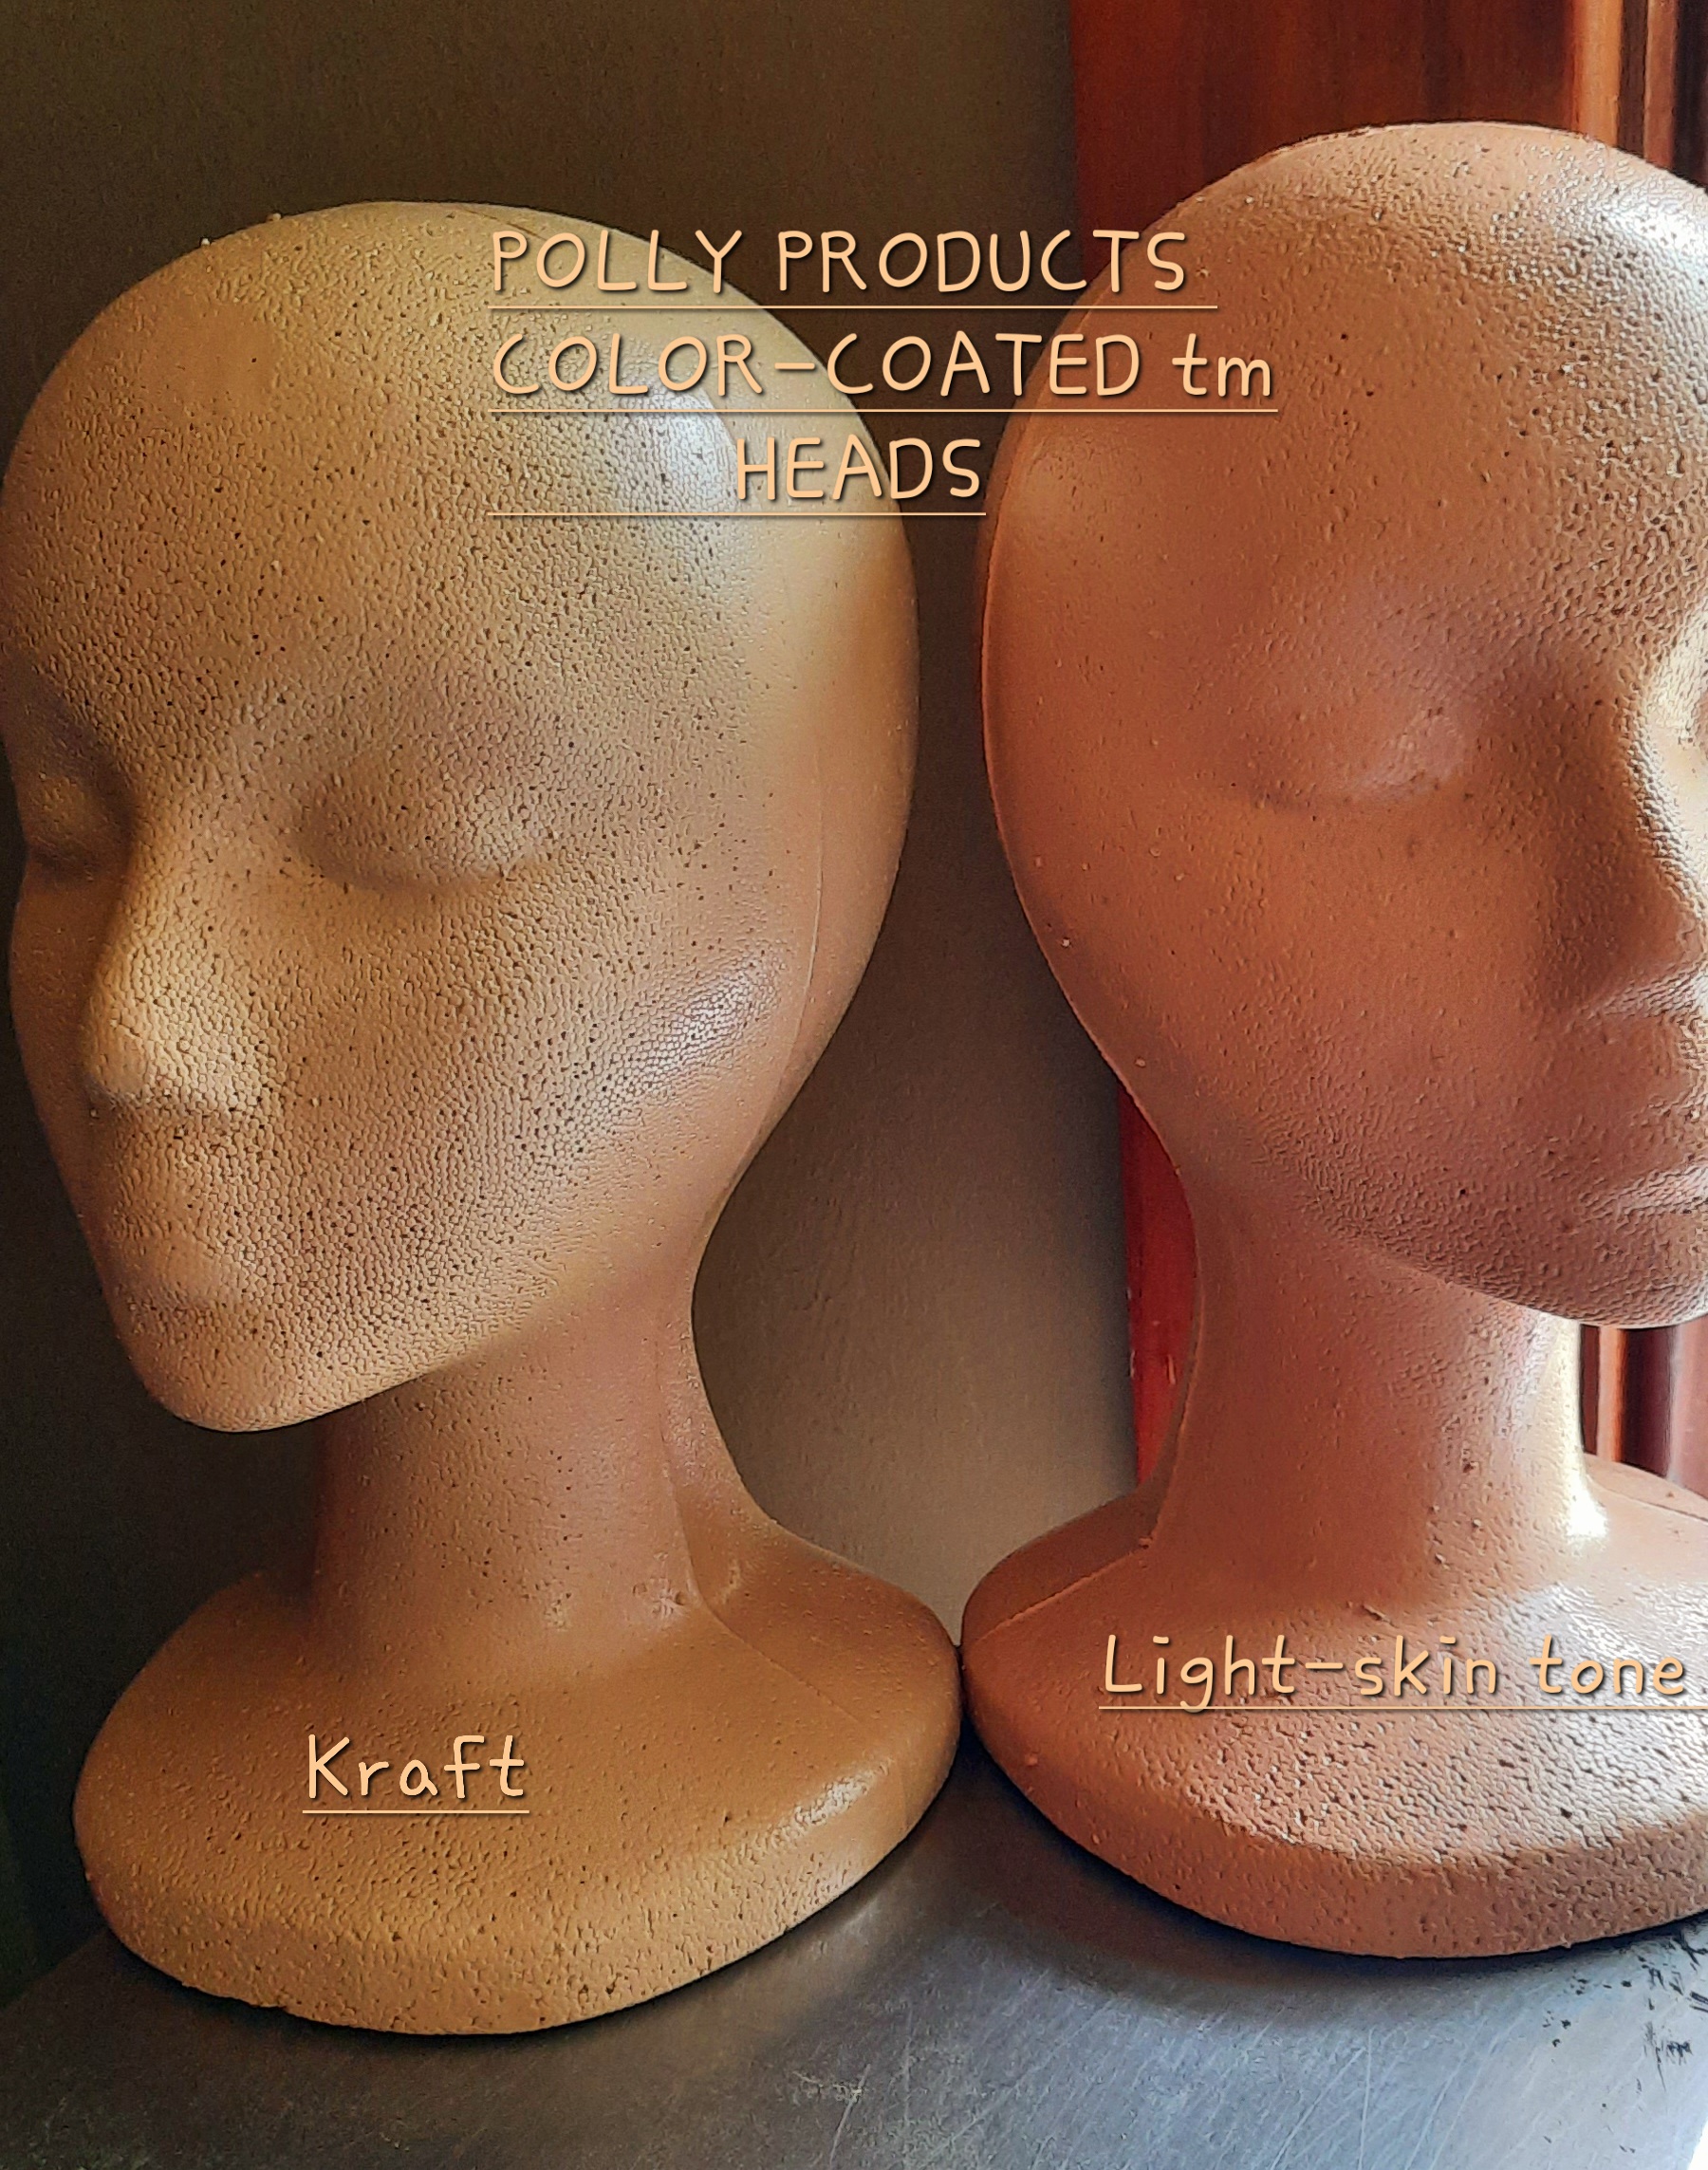 COLOR-COATED tm HEAD FORMS. #800WHCCC WIDE BASE 12"H FEMALE HEAD FORMS. MULTIPLE COLOR OPTIONS. MADE IN THE USA QUALITY.